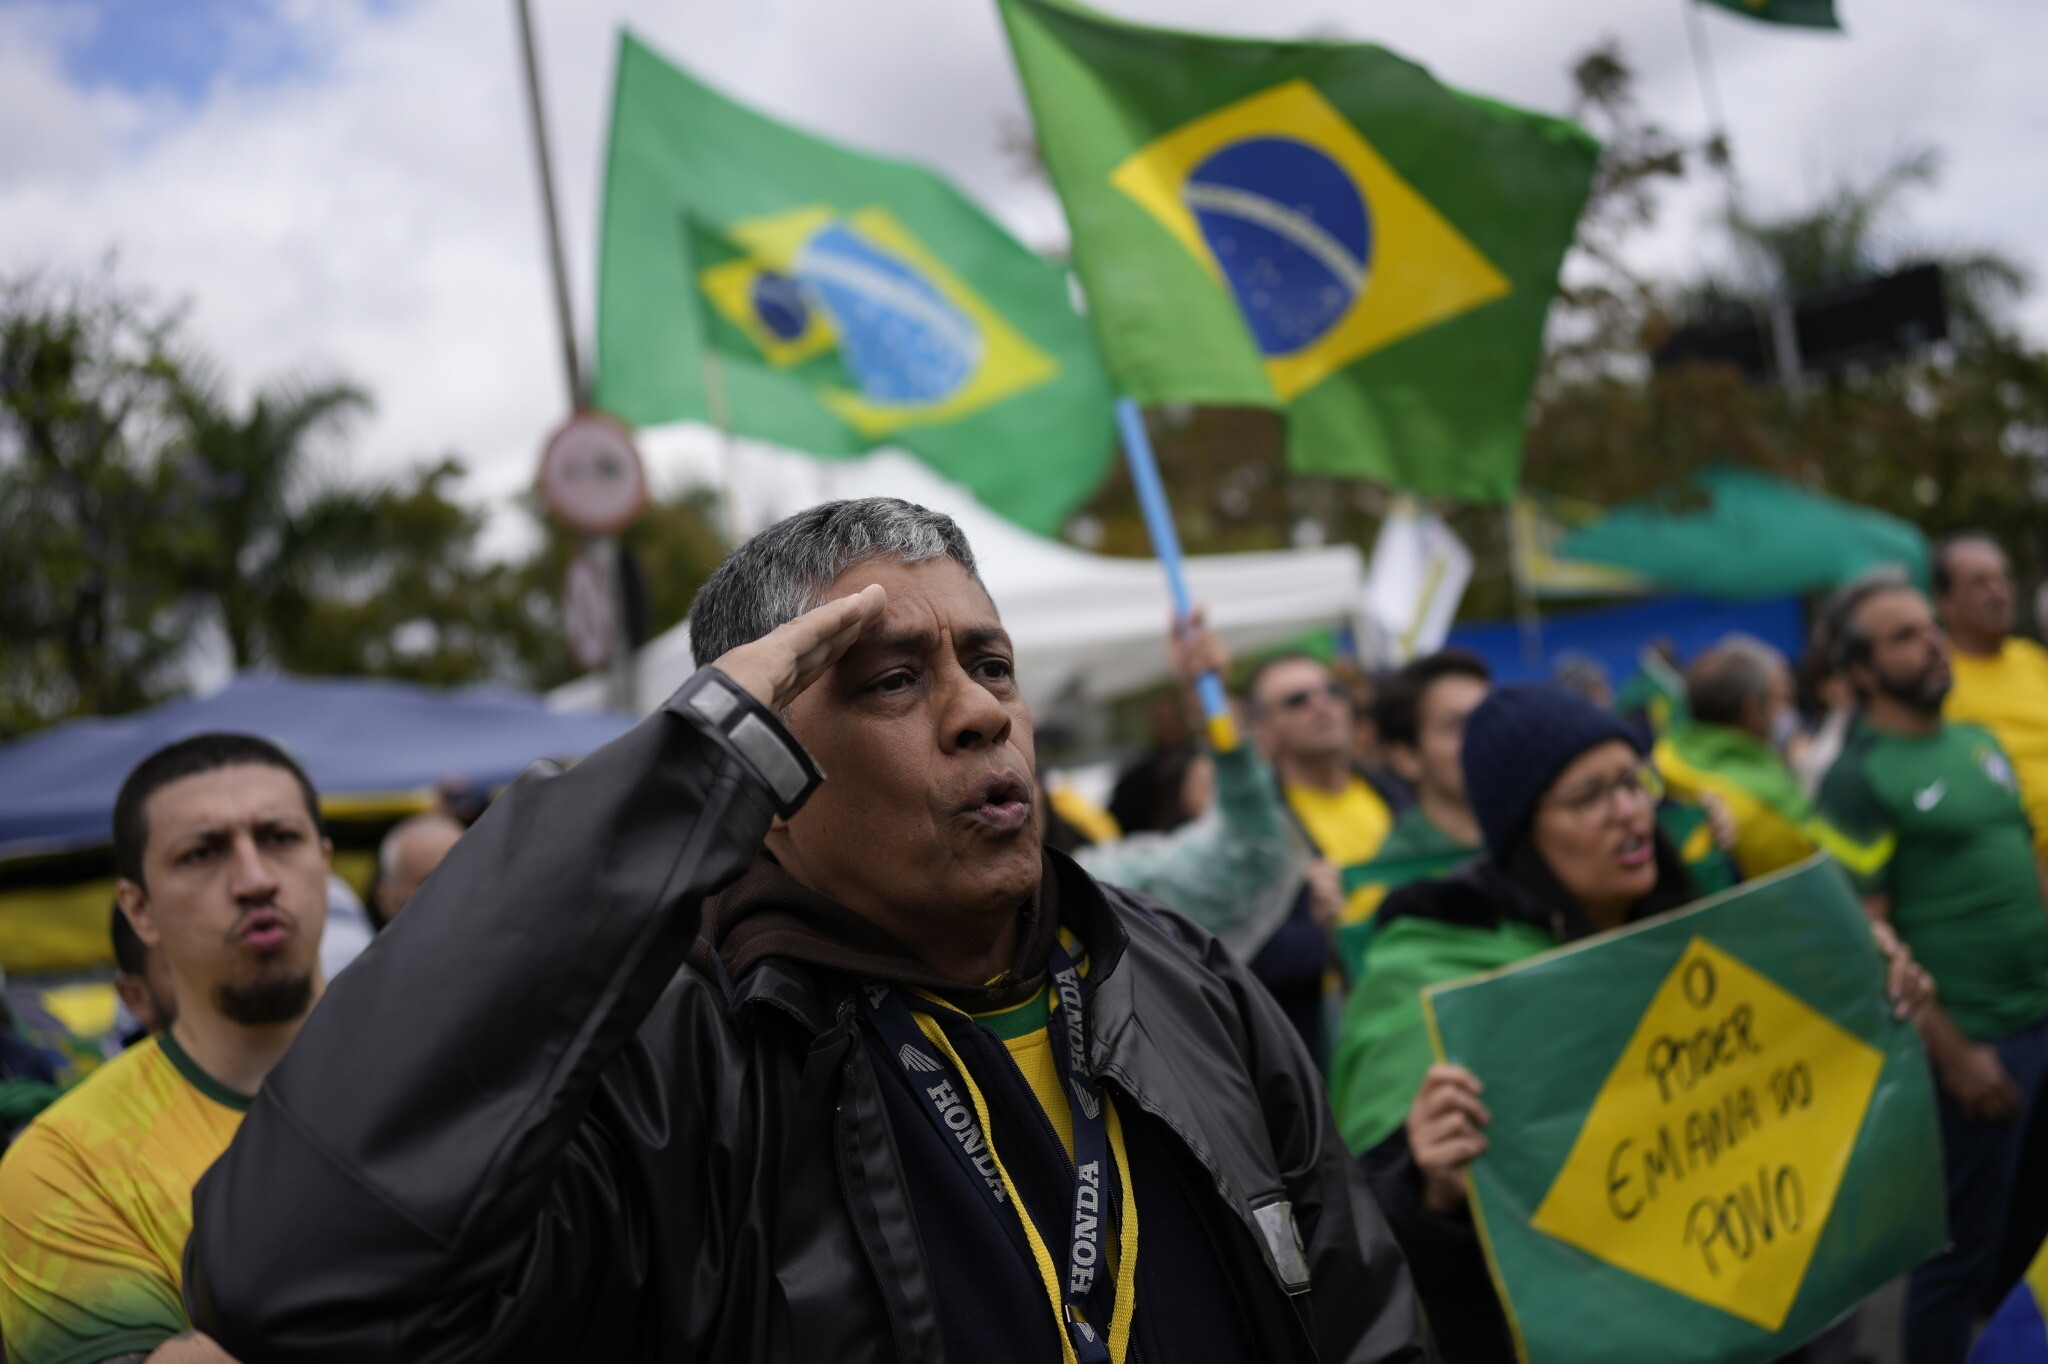 Brazil's right-wing movement will persist without Bolsonaro